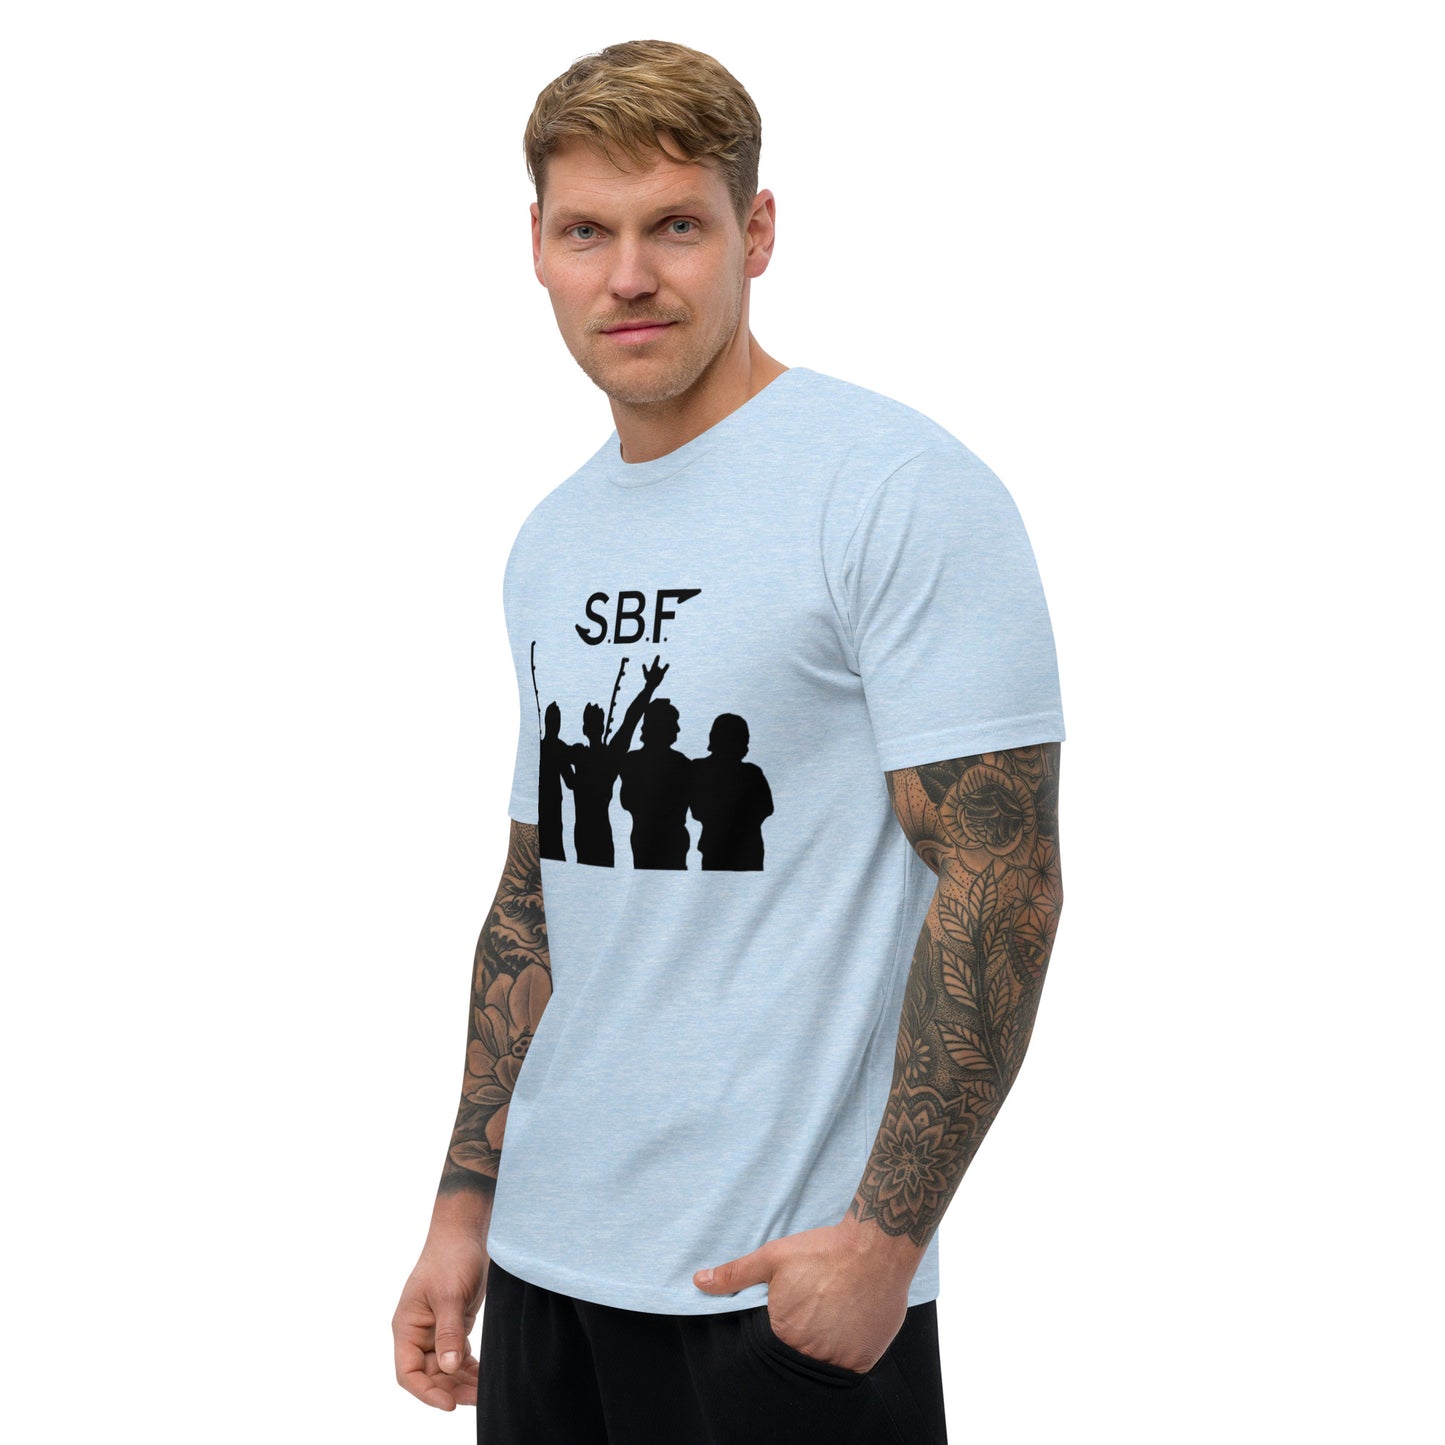 SBF "With The Boys" Short Sleeve T-shirt